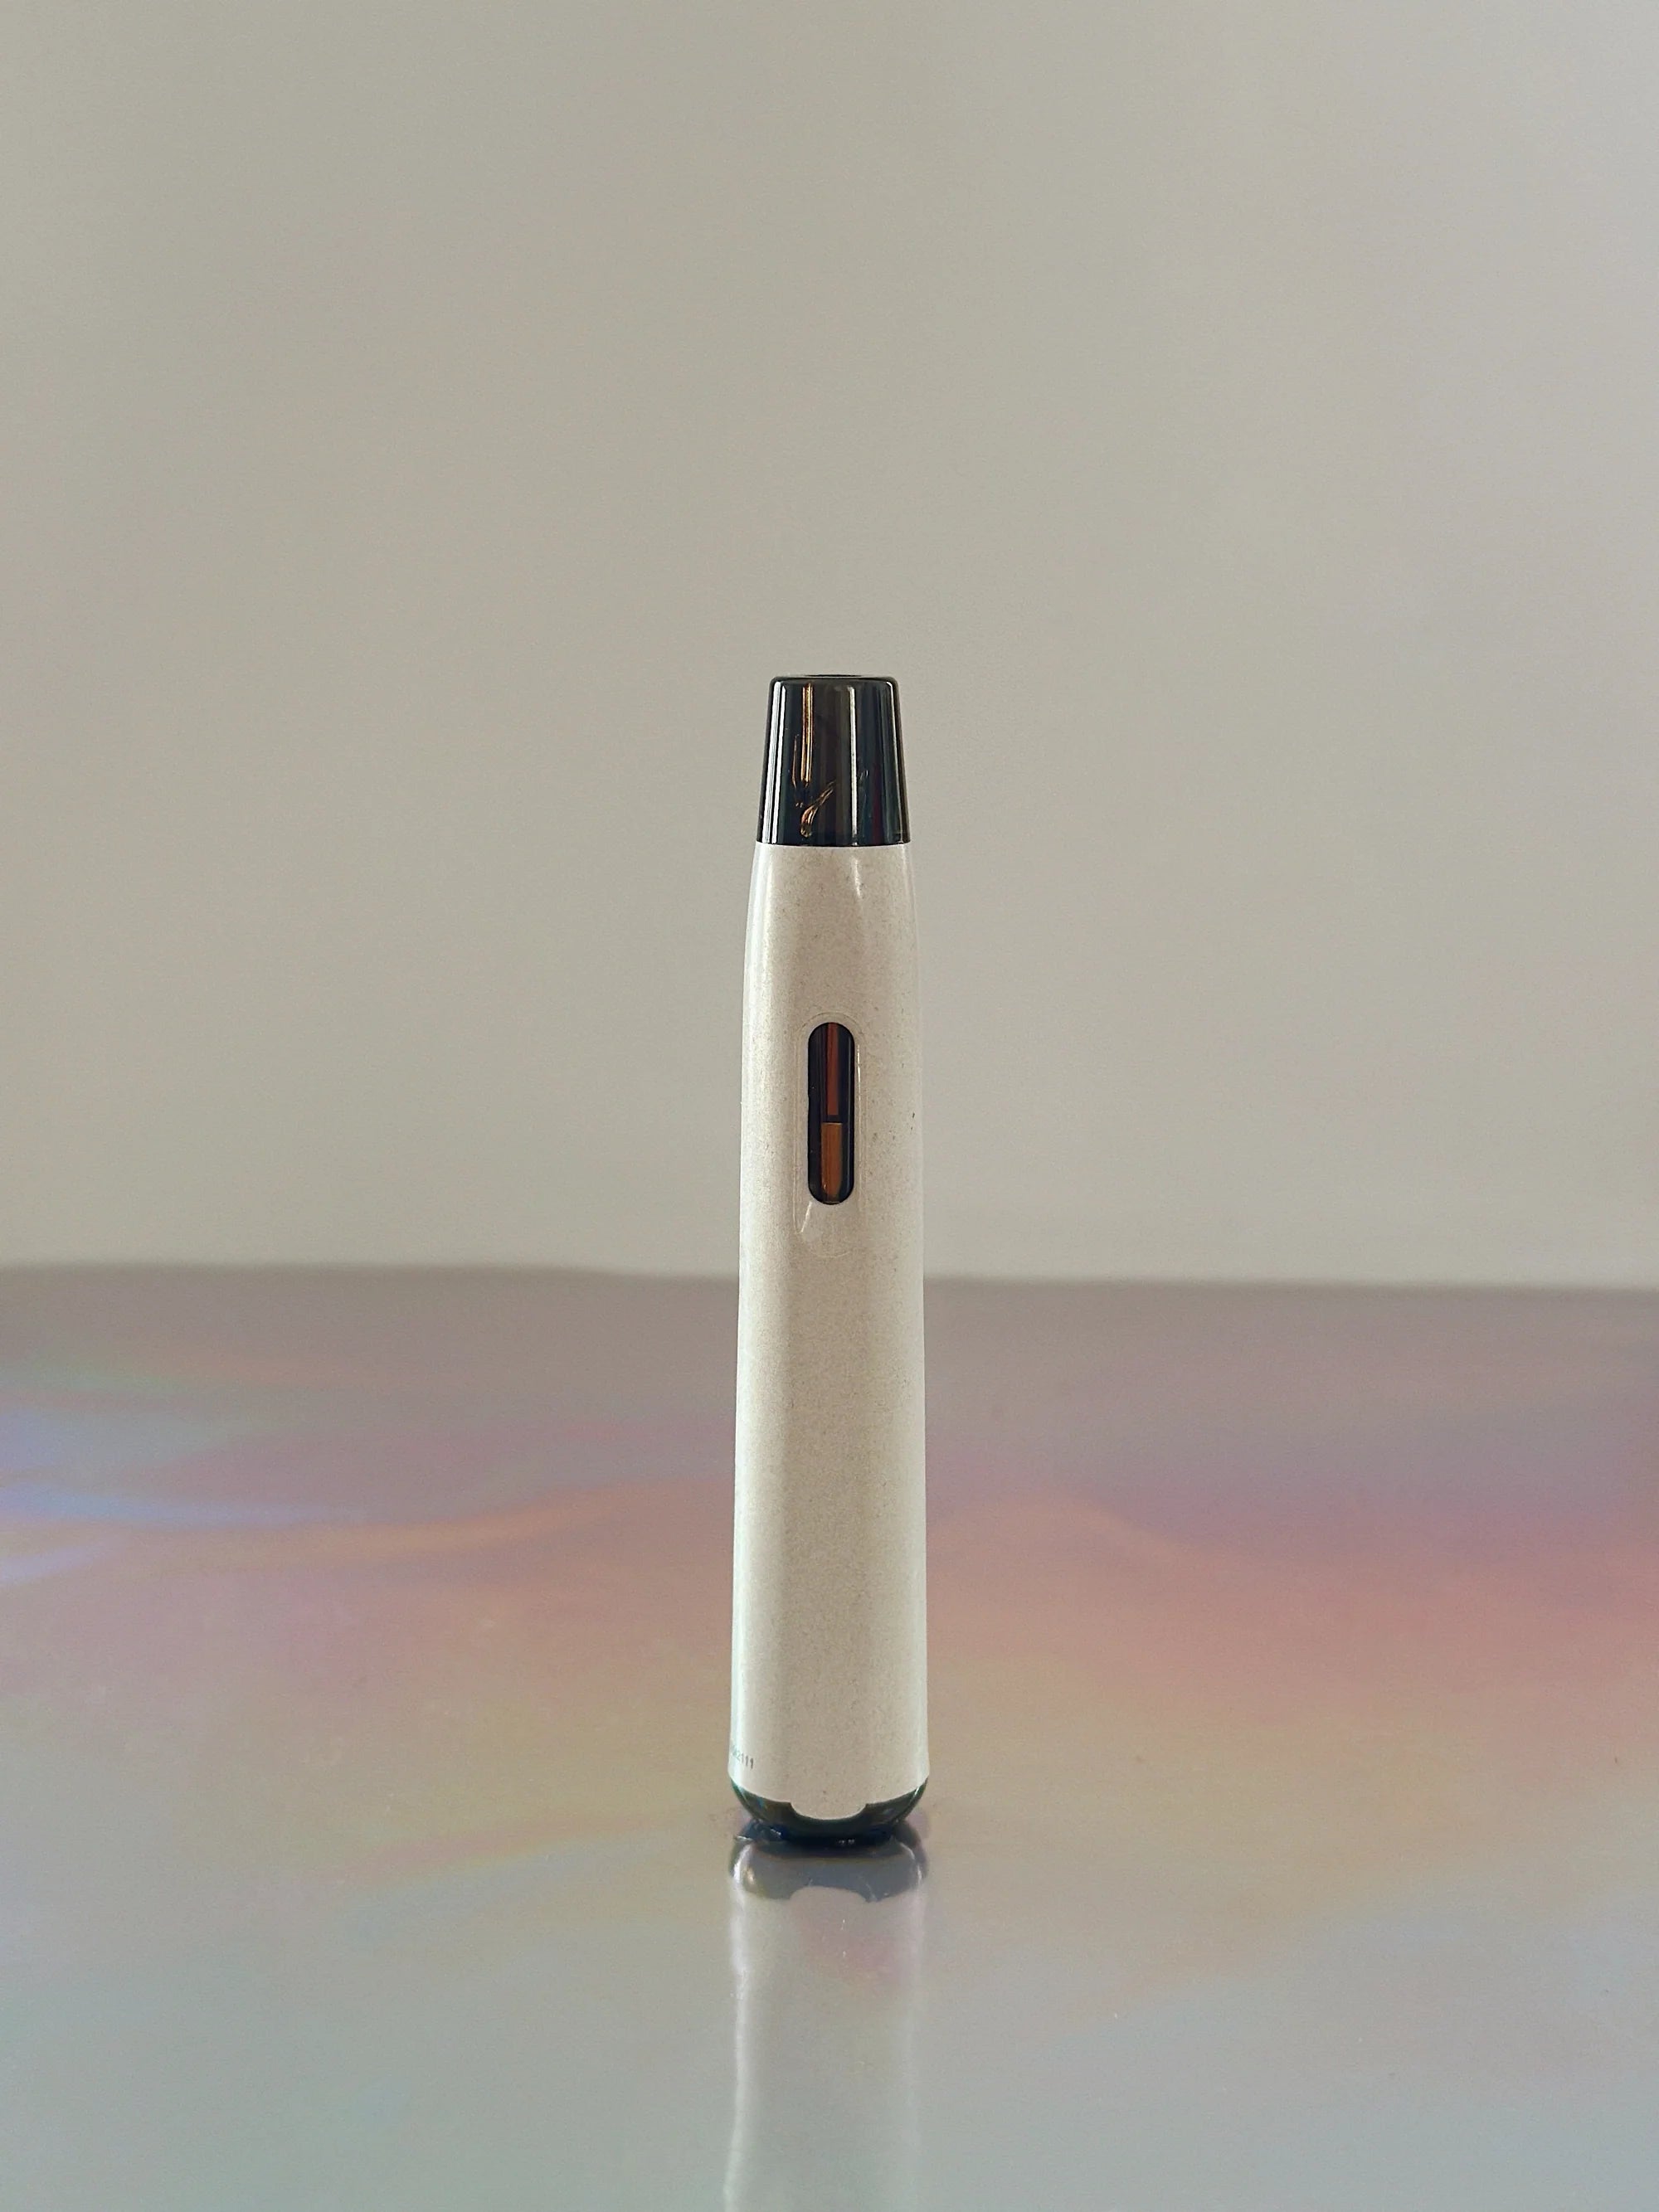 Information About the Blue Lotus Vape